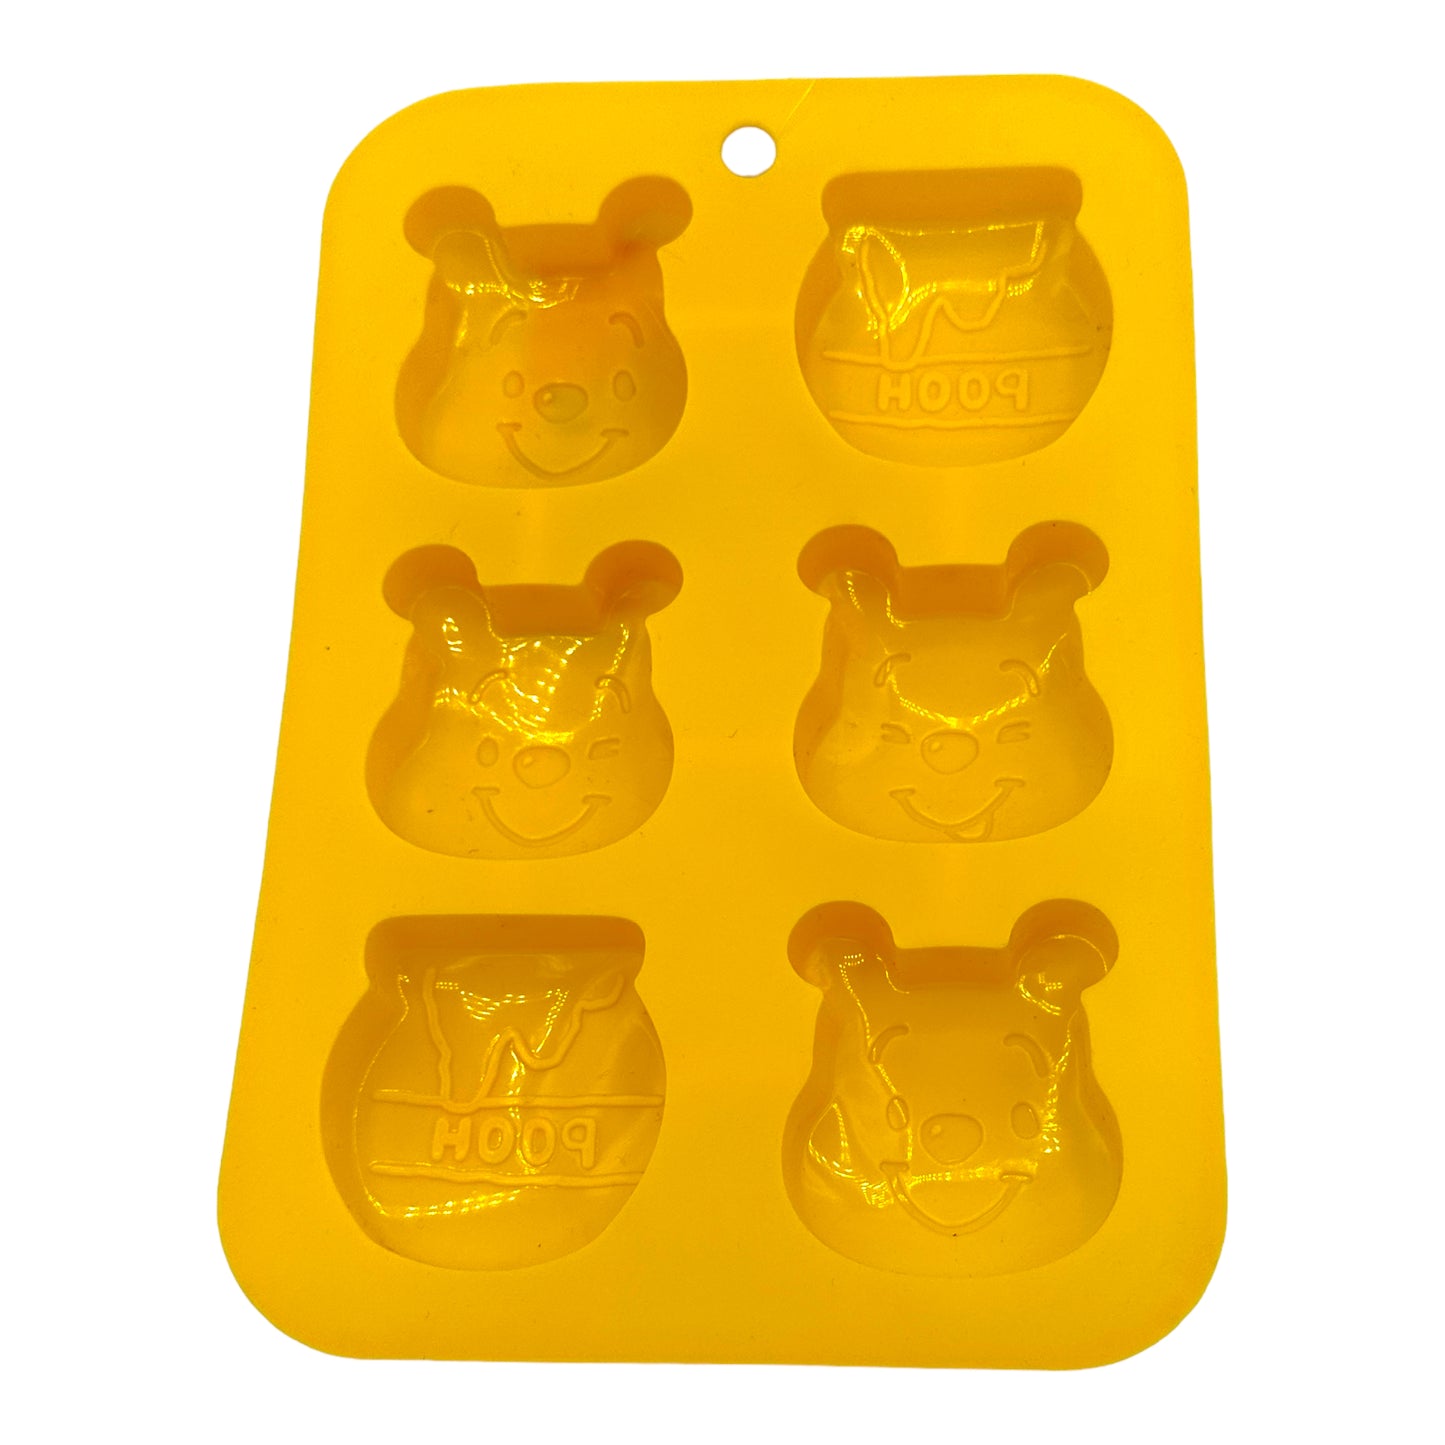 Large Winnie The Pooh Silicone Cake Mold